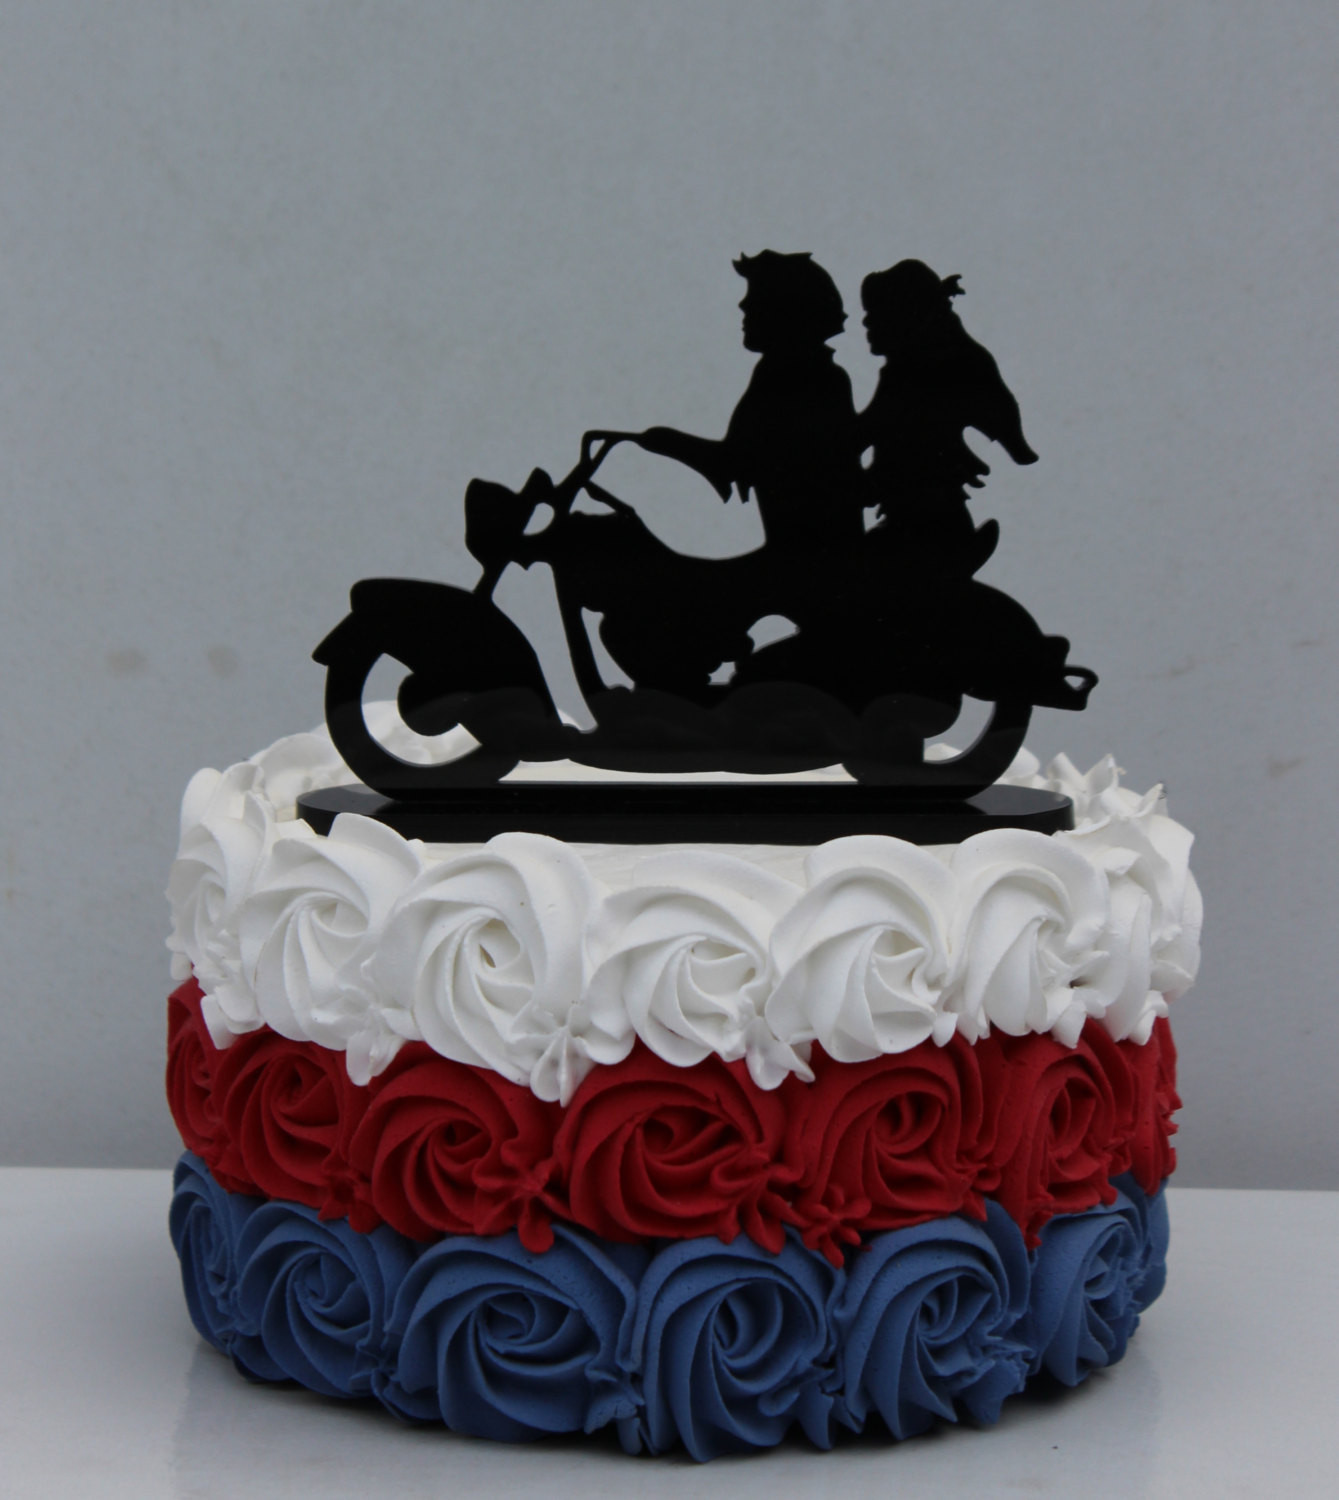 Motorcycle Cake Toppers For Wedding Cakes
 Motorcycle BIKER Wedding Cake topper motorcyclist by